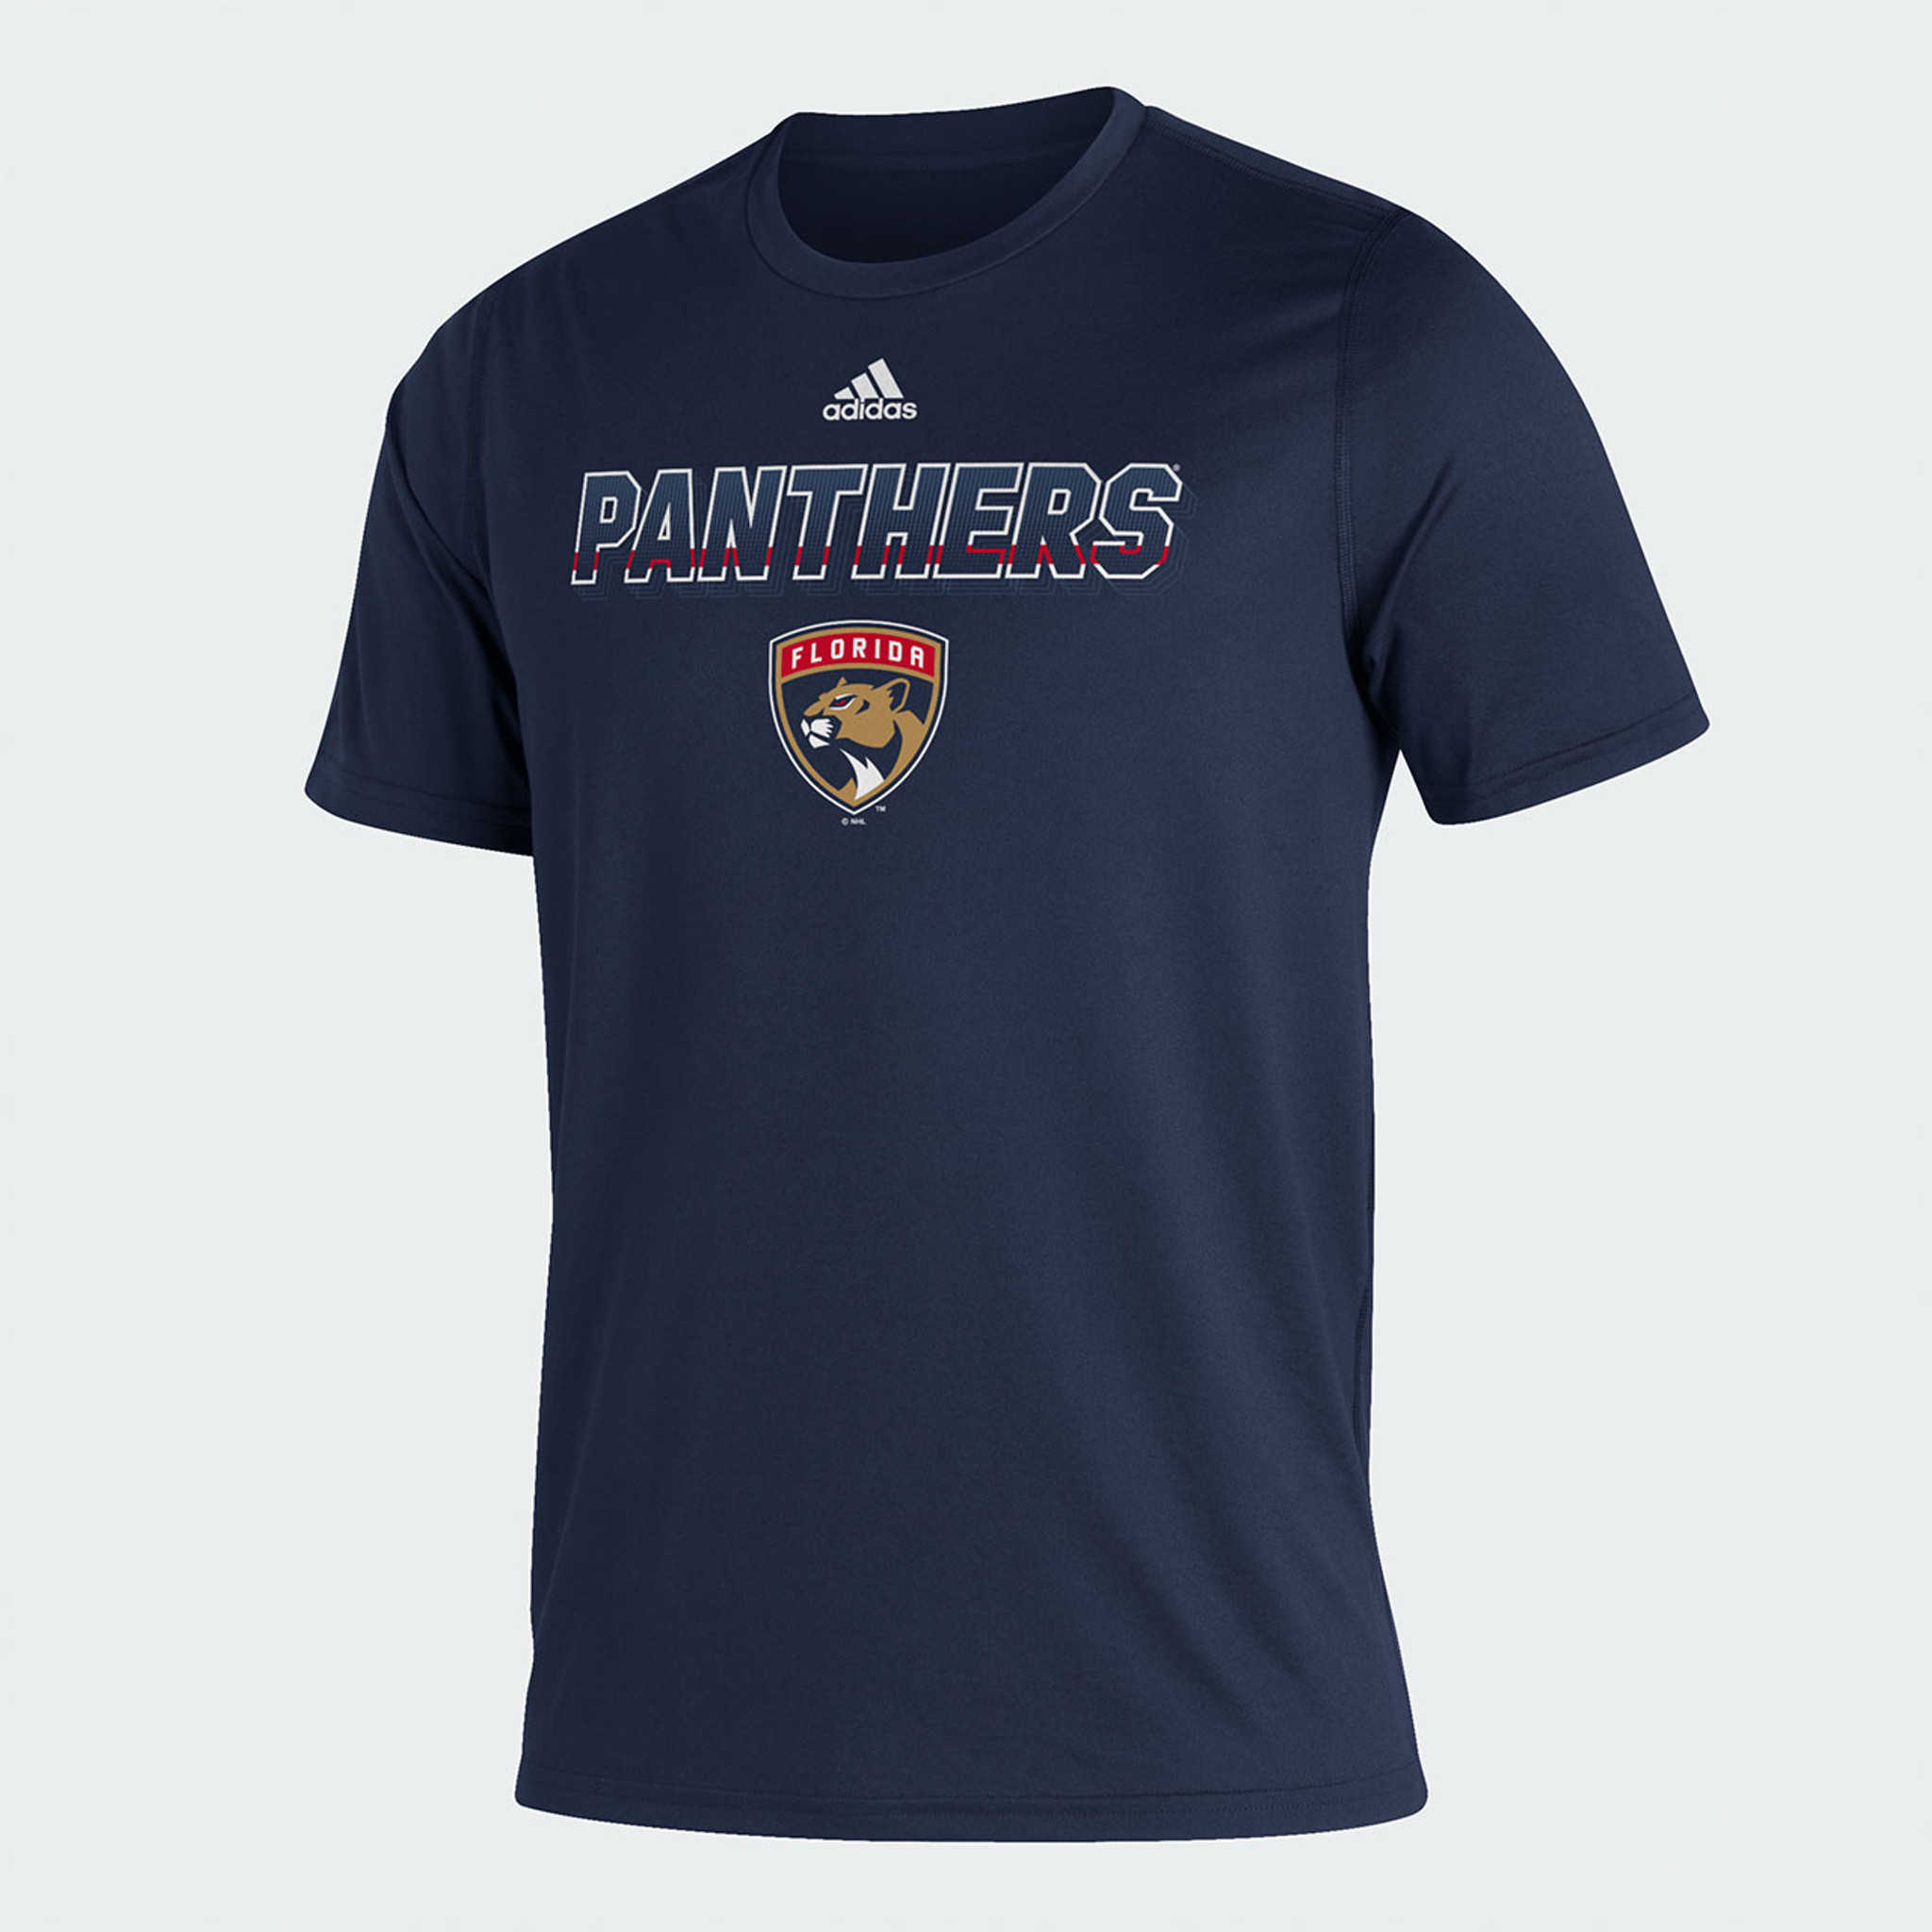 Dynasty Florida Panthers Leaping Panther Shirt